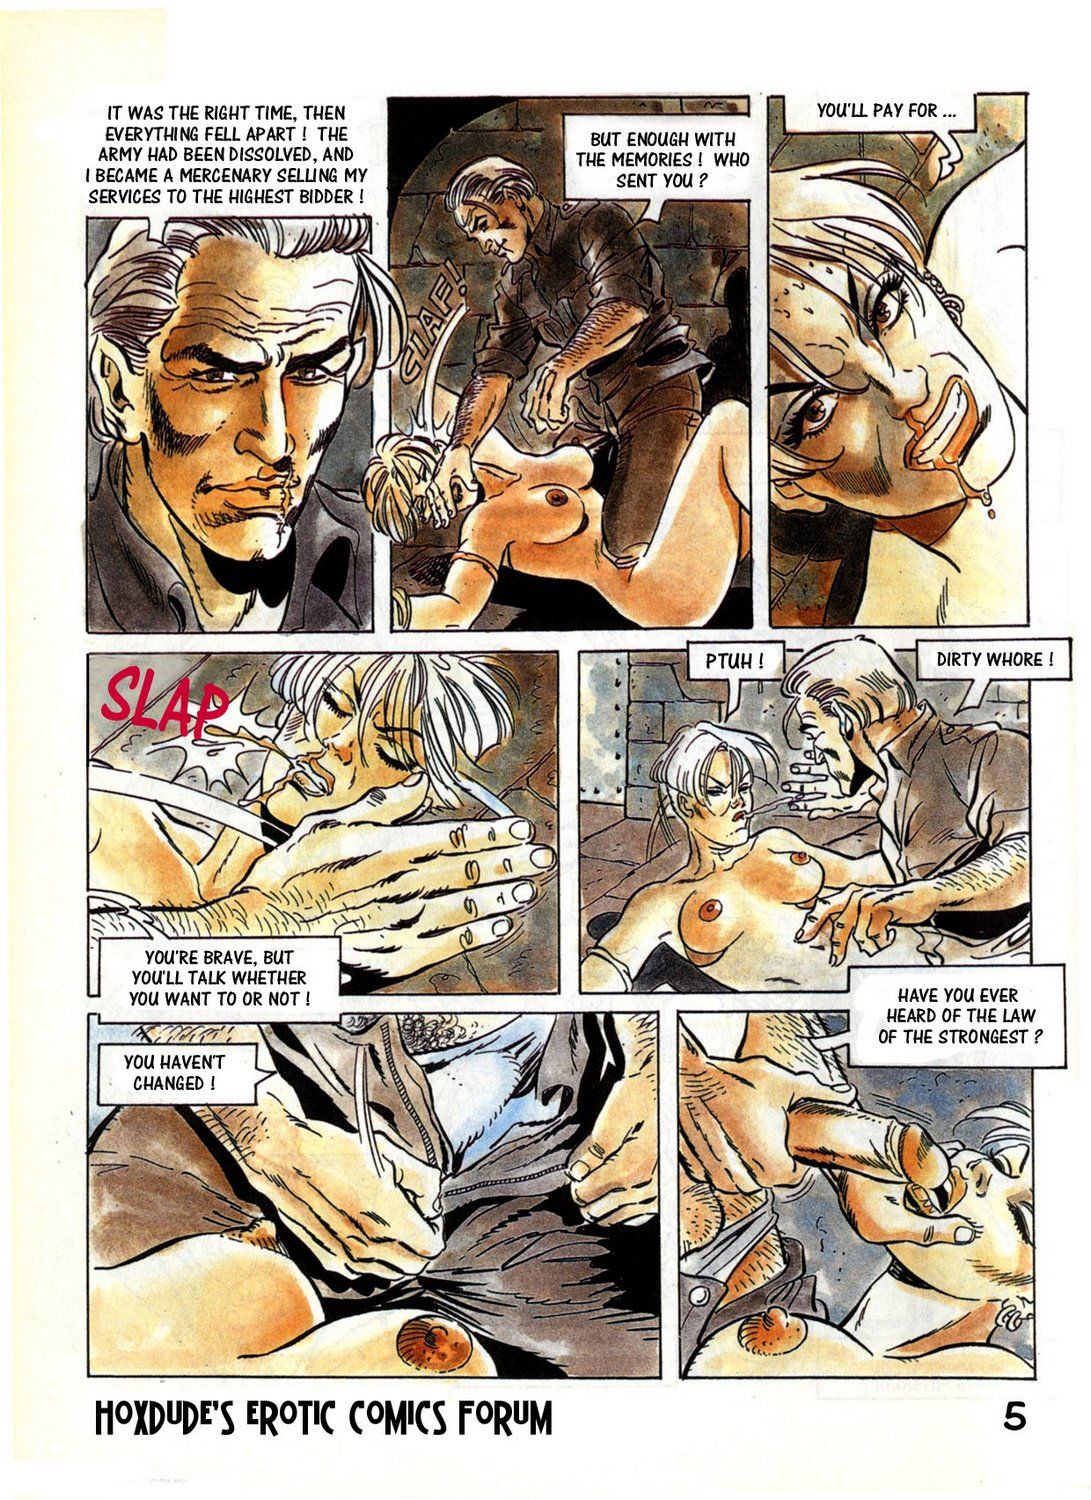 A Face from the Past Onnis/Pesce (Erotic Comix) page 7